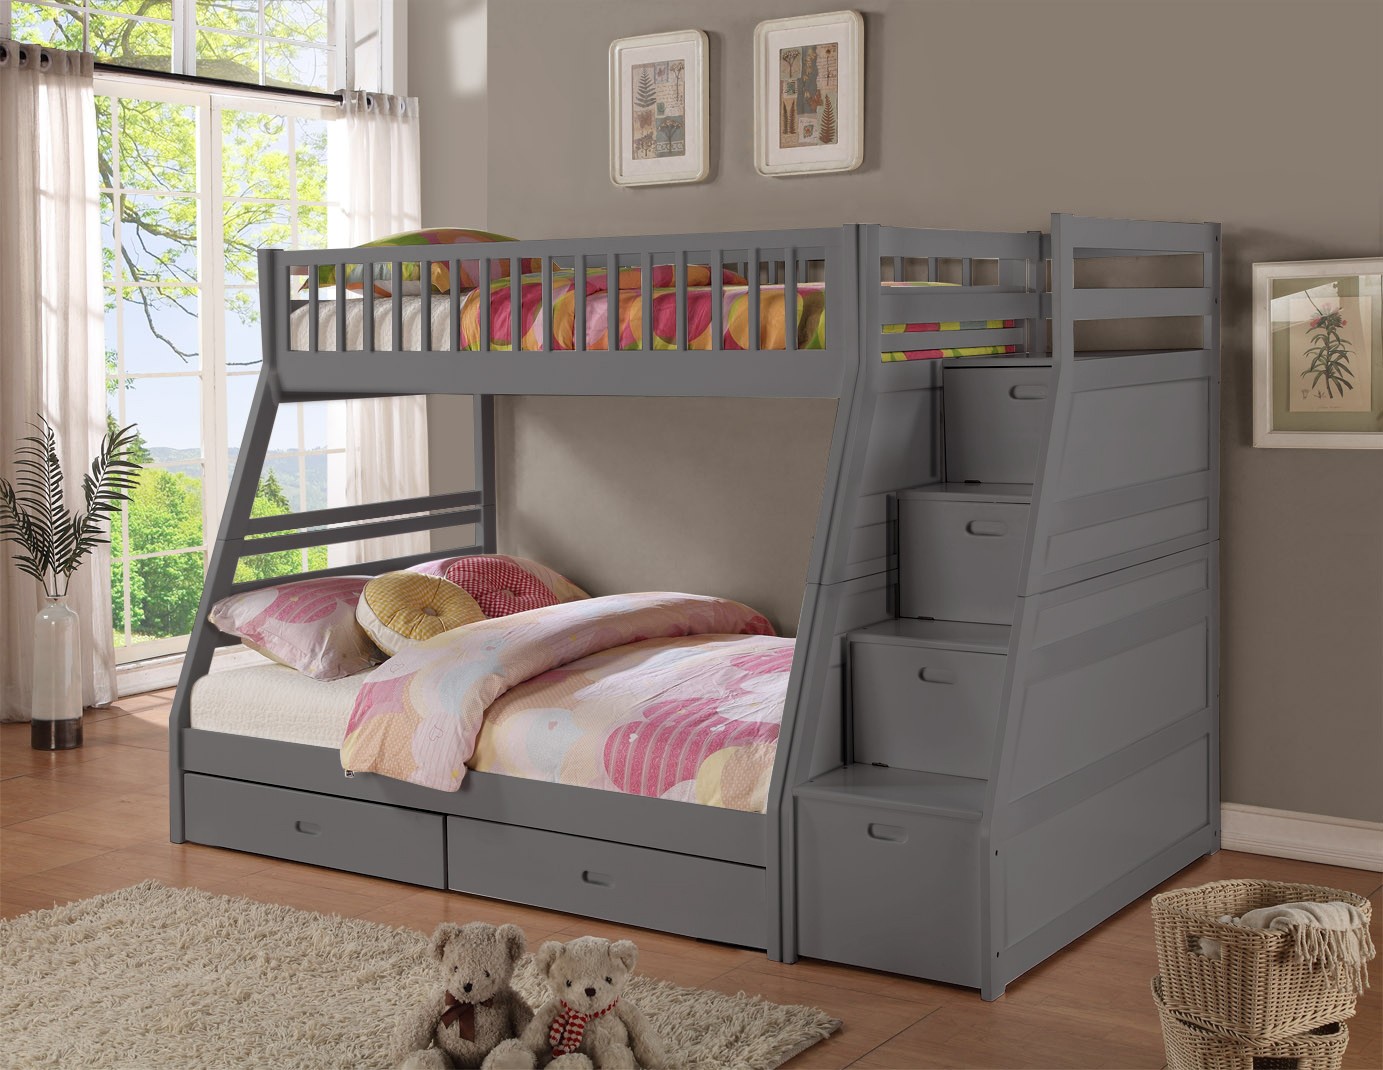 81" X 59" X 65" Grey Manufactured Wood and Solid Wood Twin or Full Staircase Bunk Bed with Storage